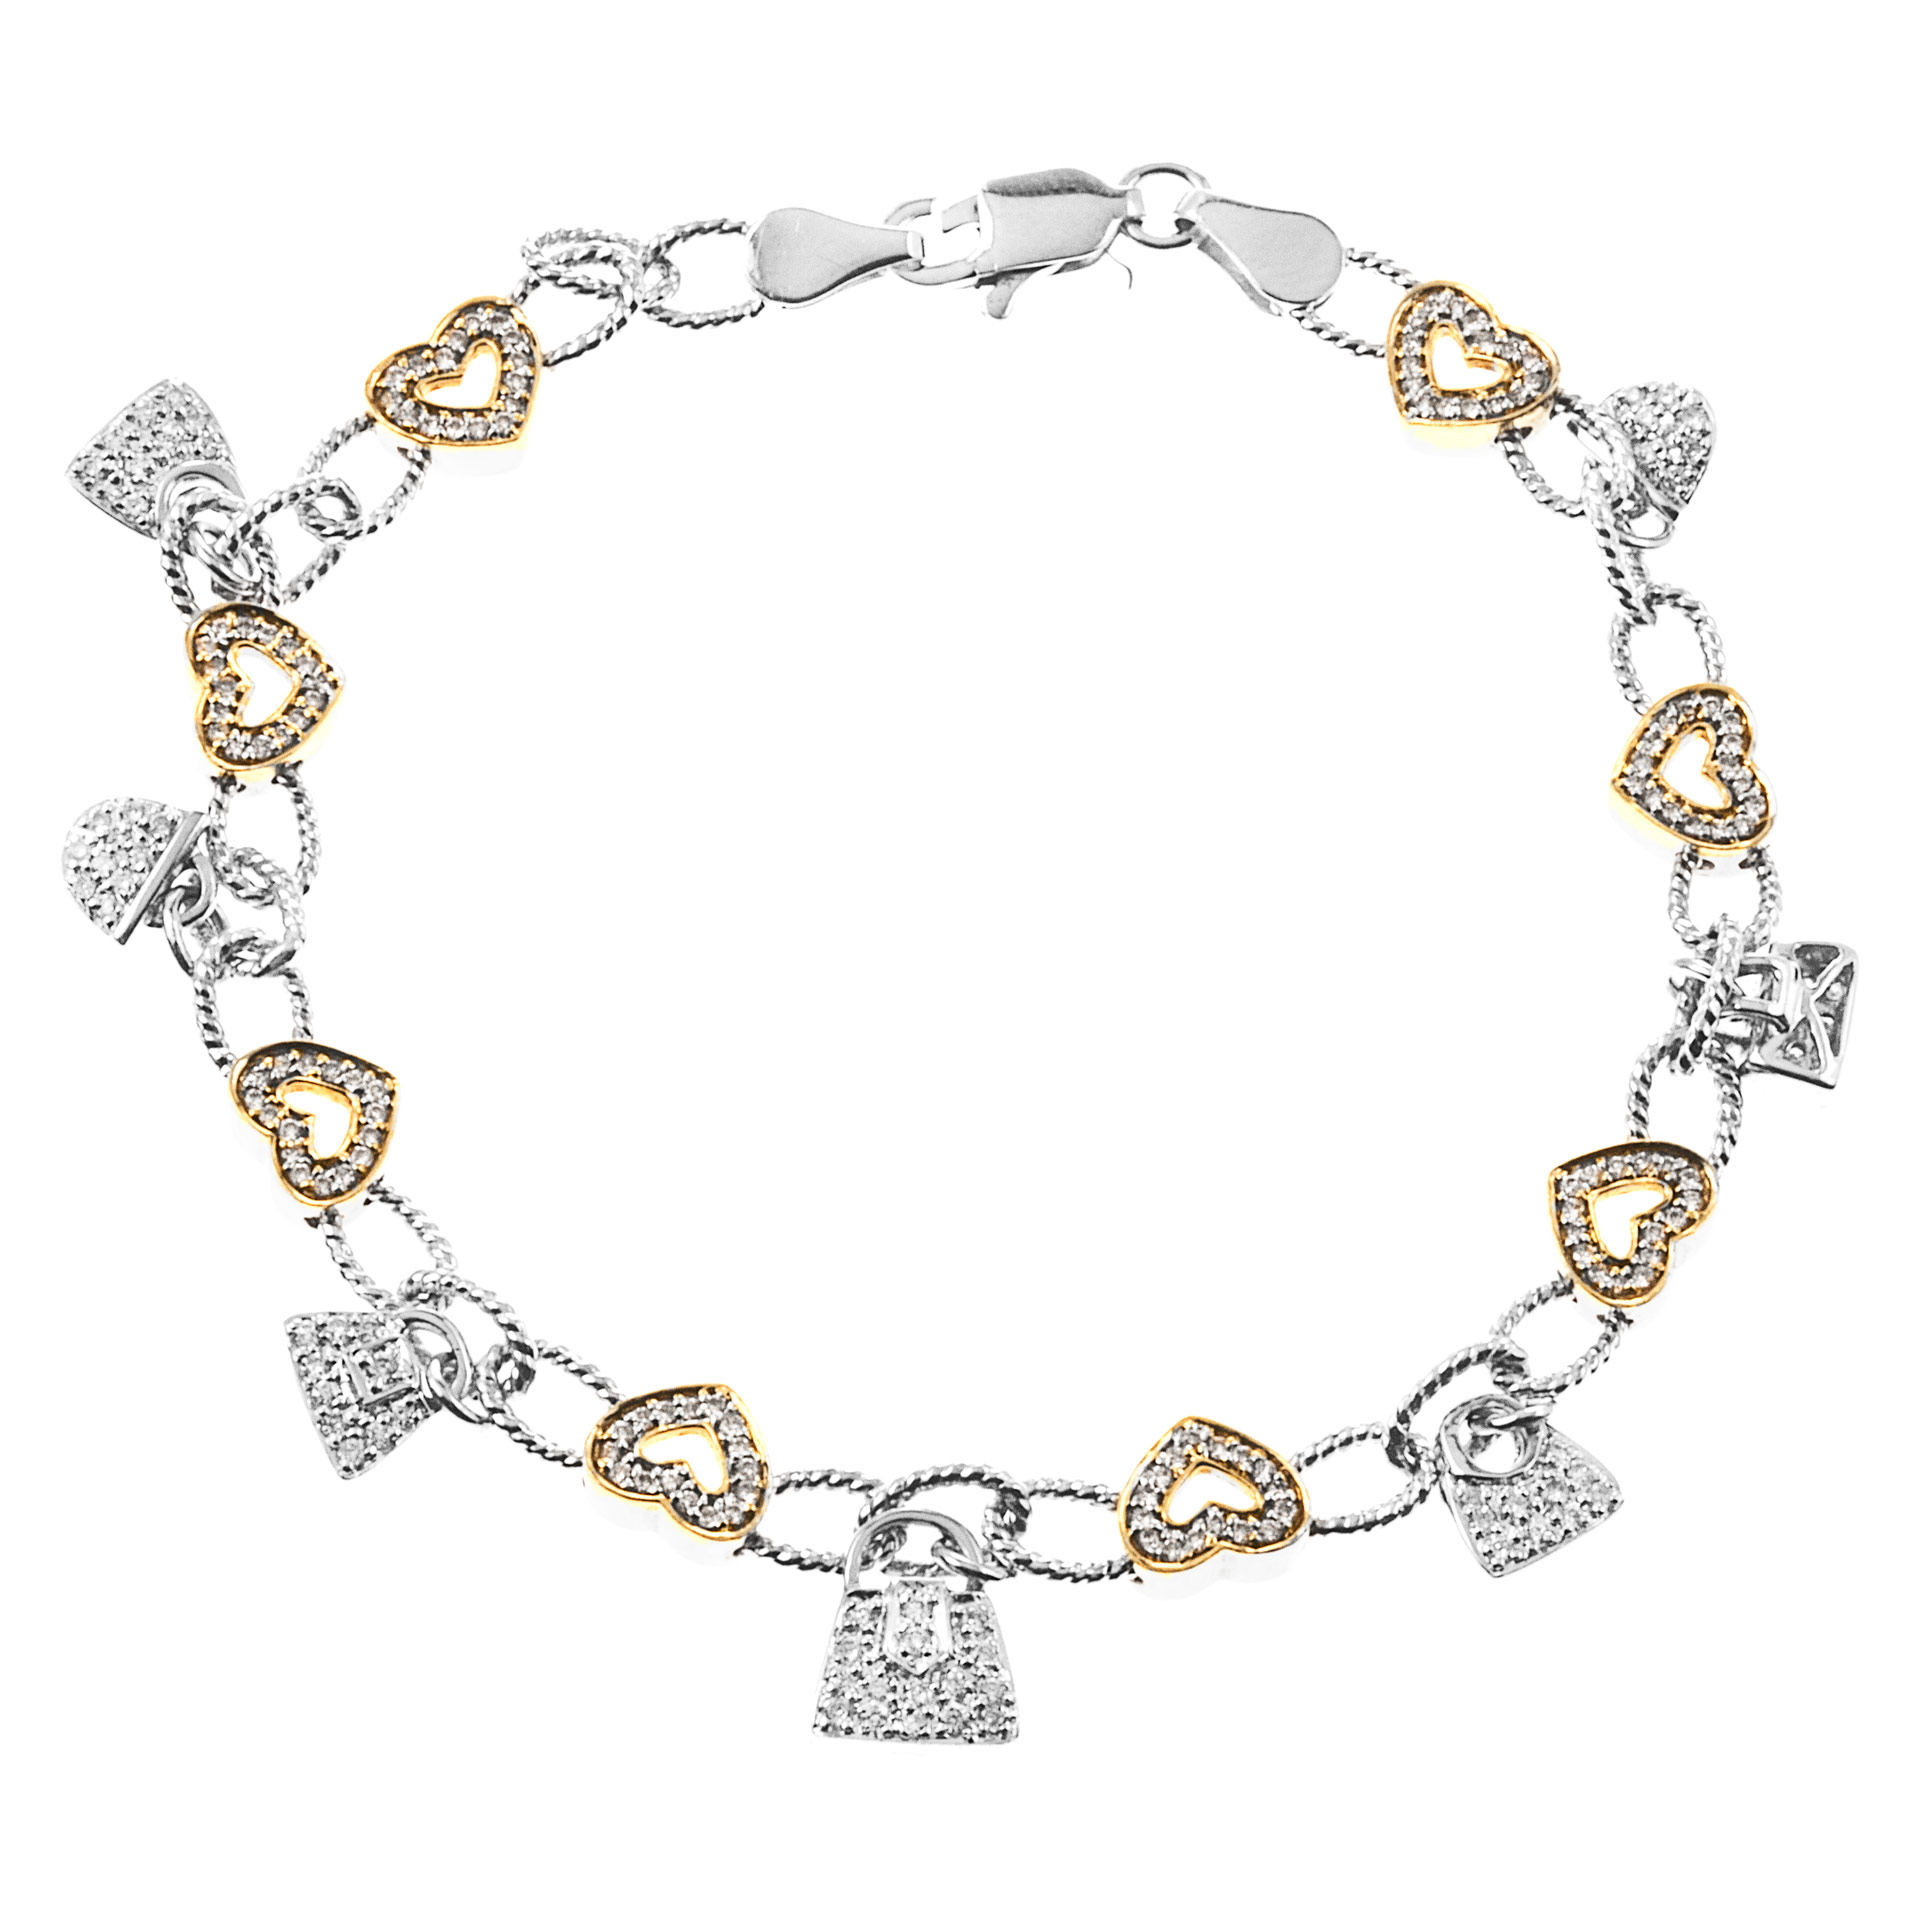 Stylish two tone 18k gold bracelet with diamond charms of hearts and bags